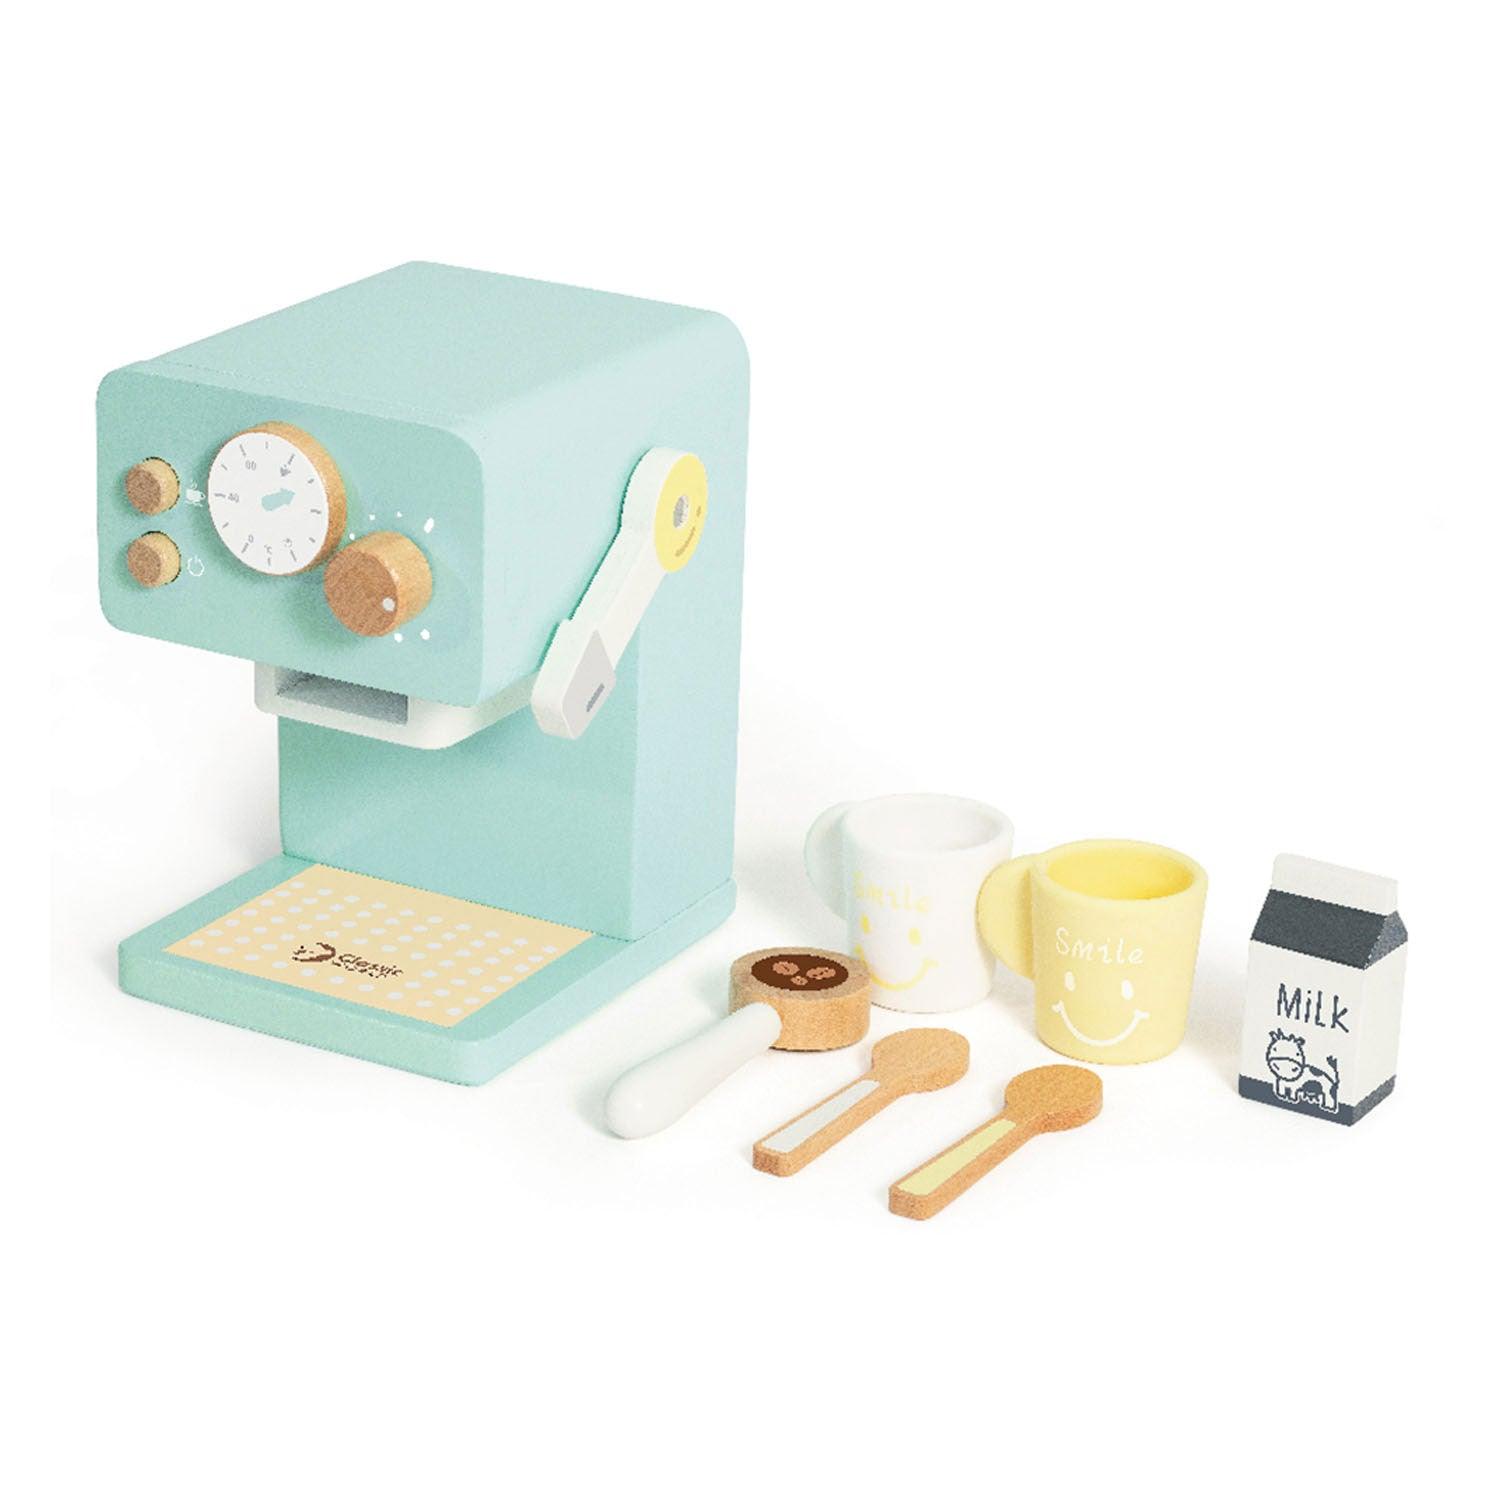 Children's Wooden Toy - A coffee maker - MoonyBoon